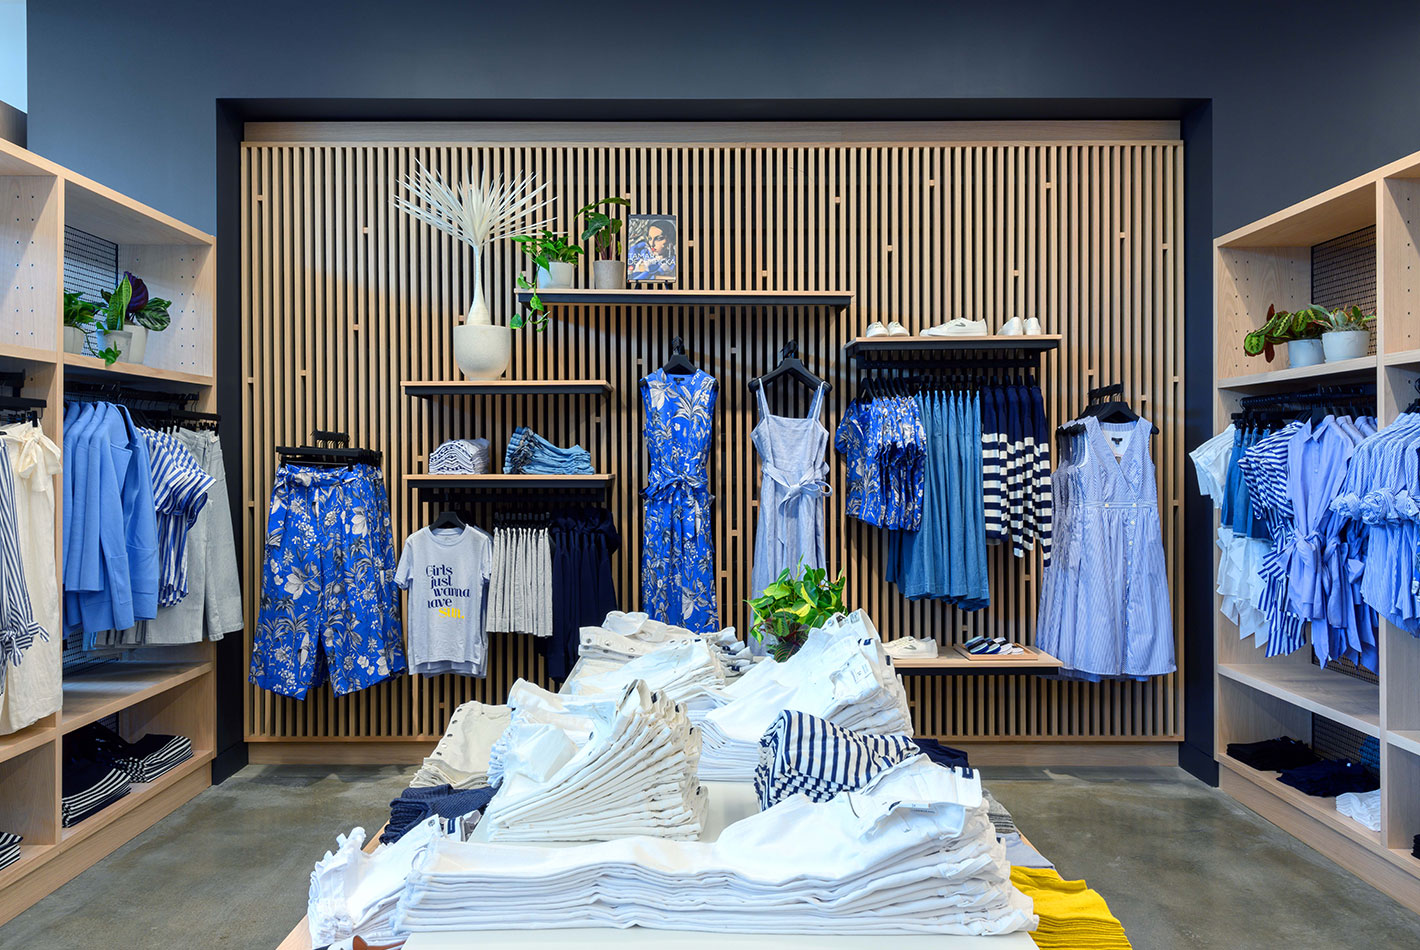 The women's clothing area at J Crew has oak shelving, blue-gray walls, and polished floors.